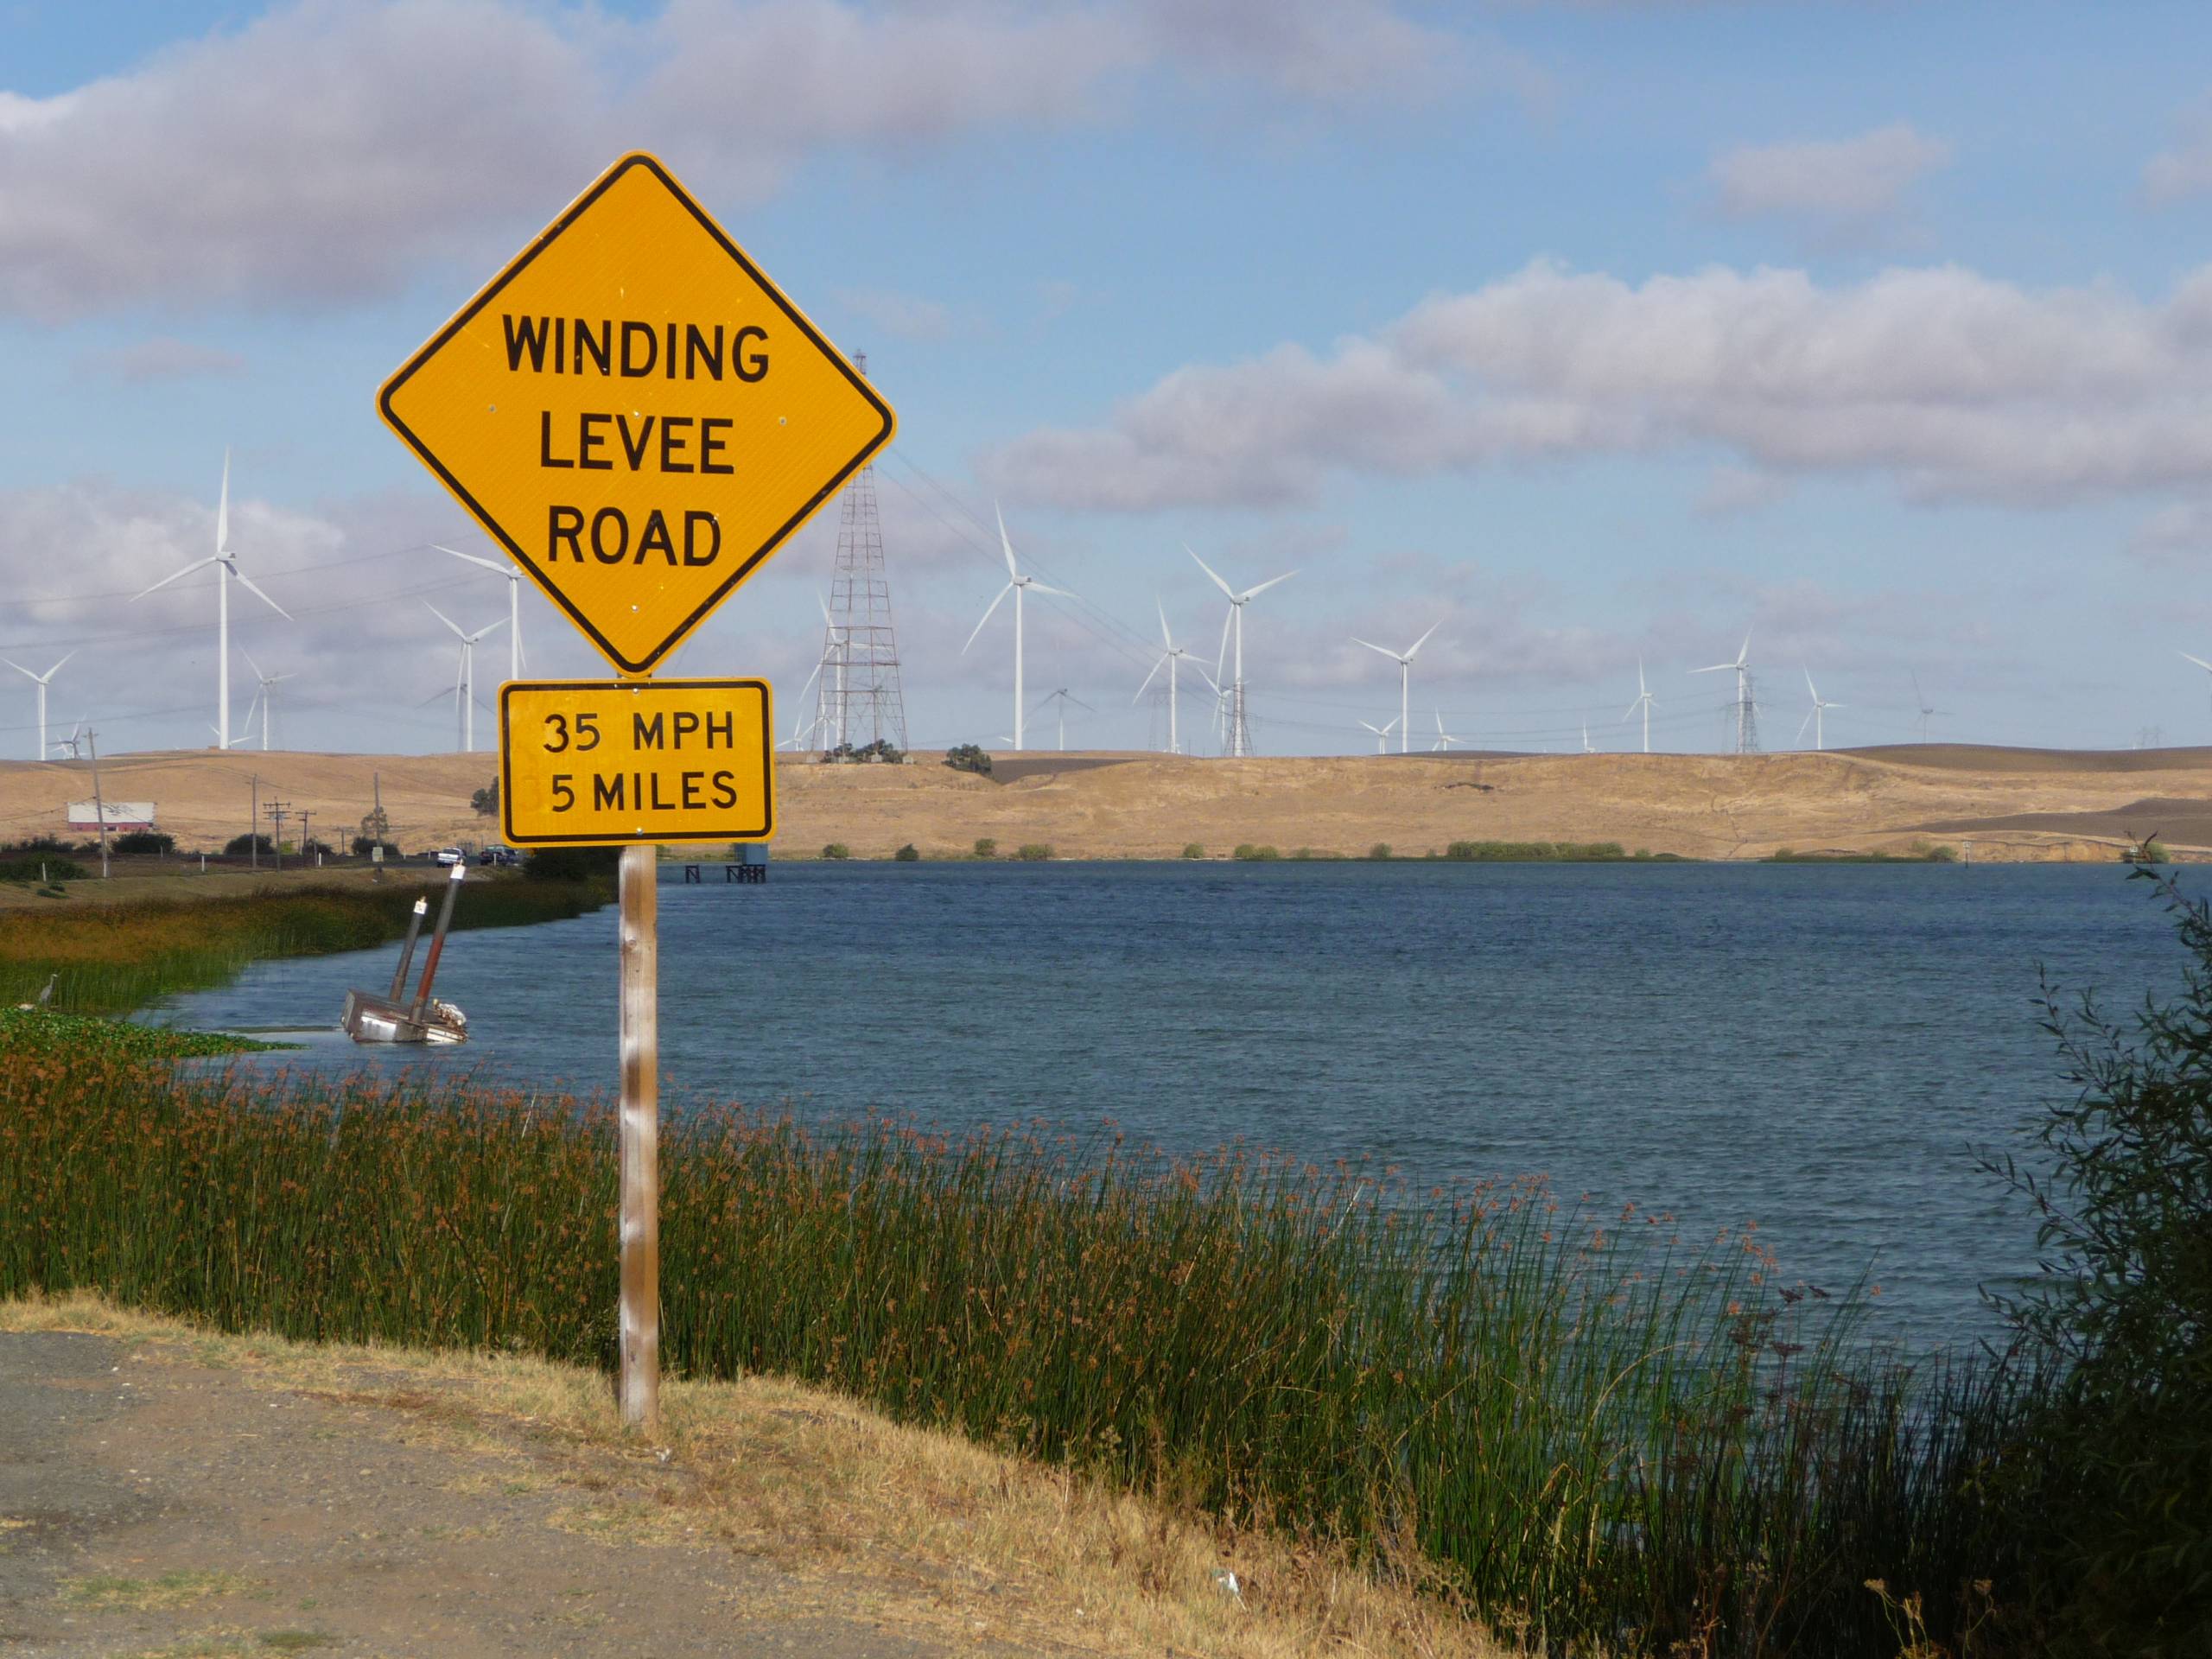 A diamond-shaped, yellow sign reads "Winding Levee Road." To the right of the sign, a body of water ripples as wind turbines spin in the background.